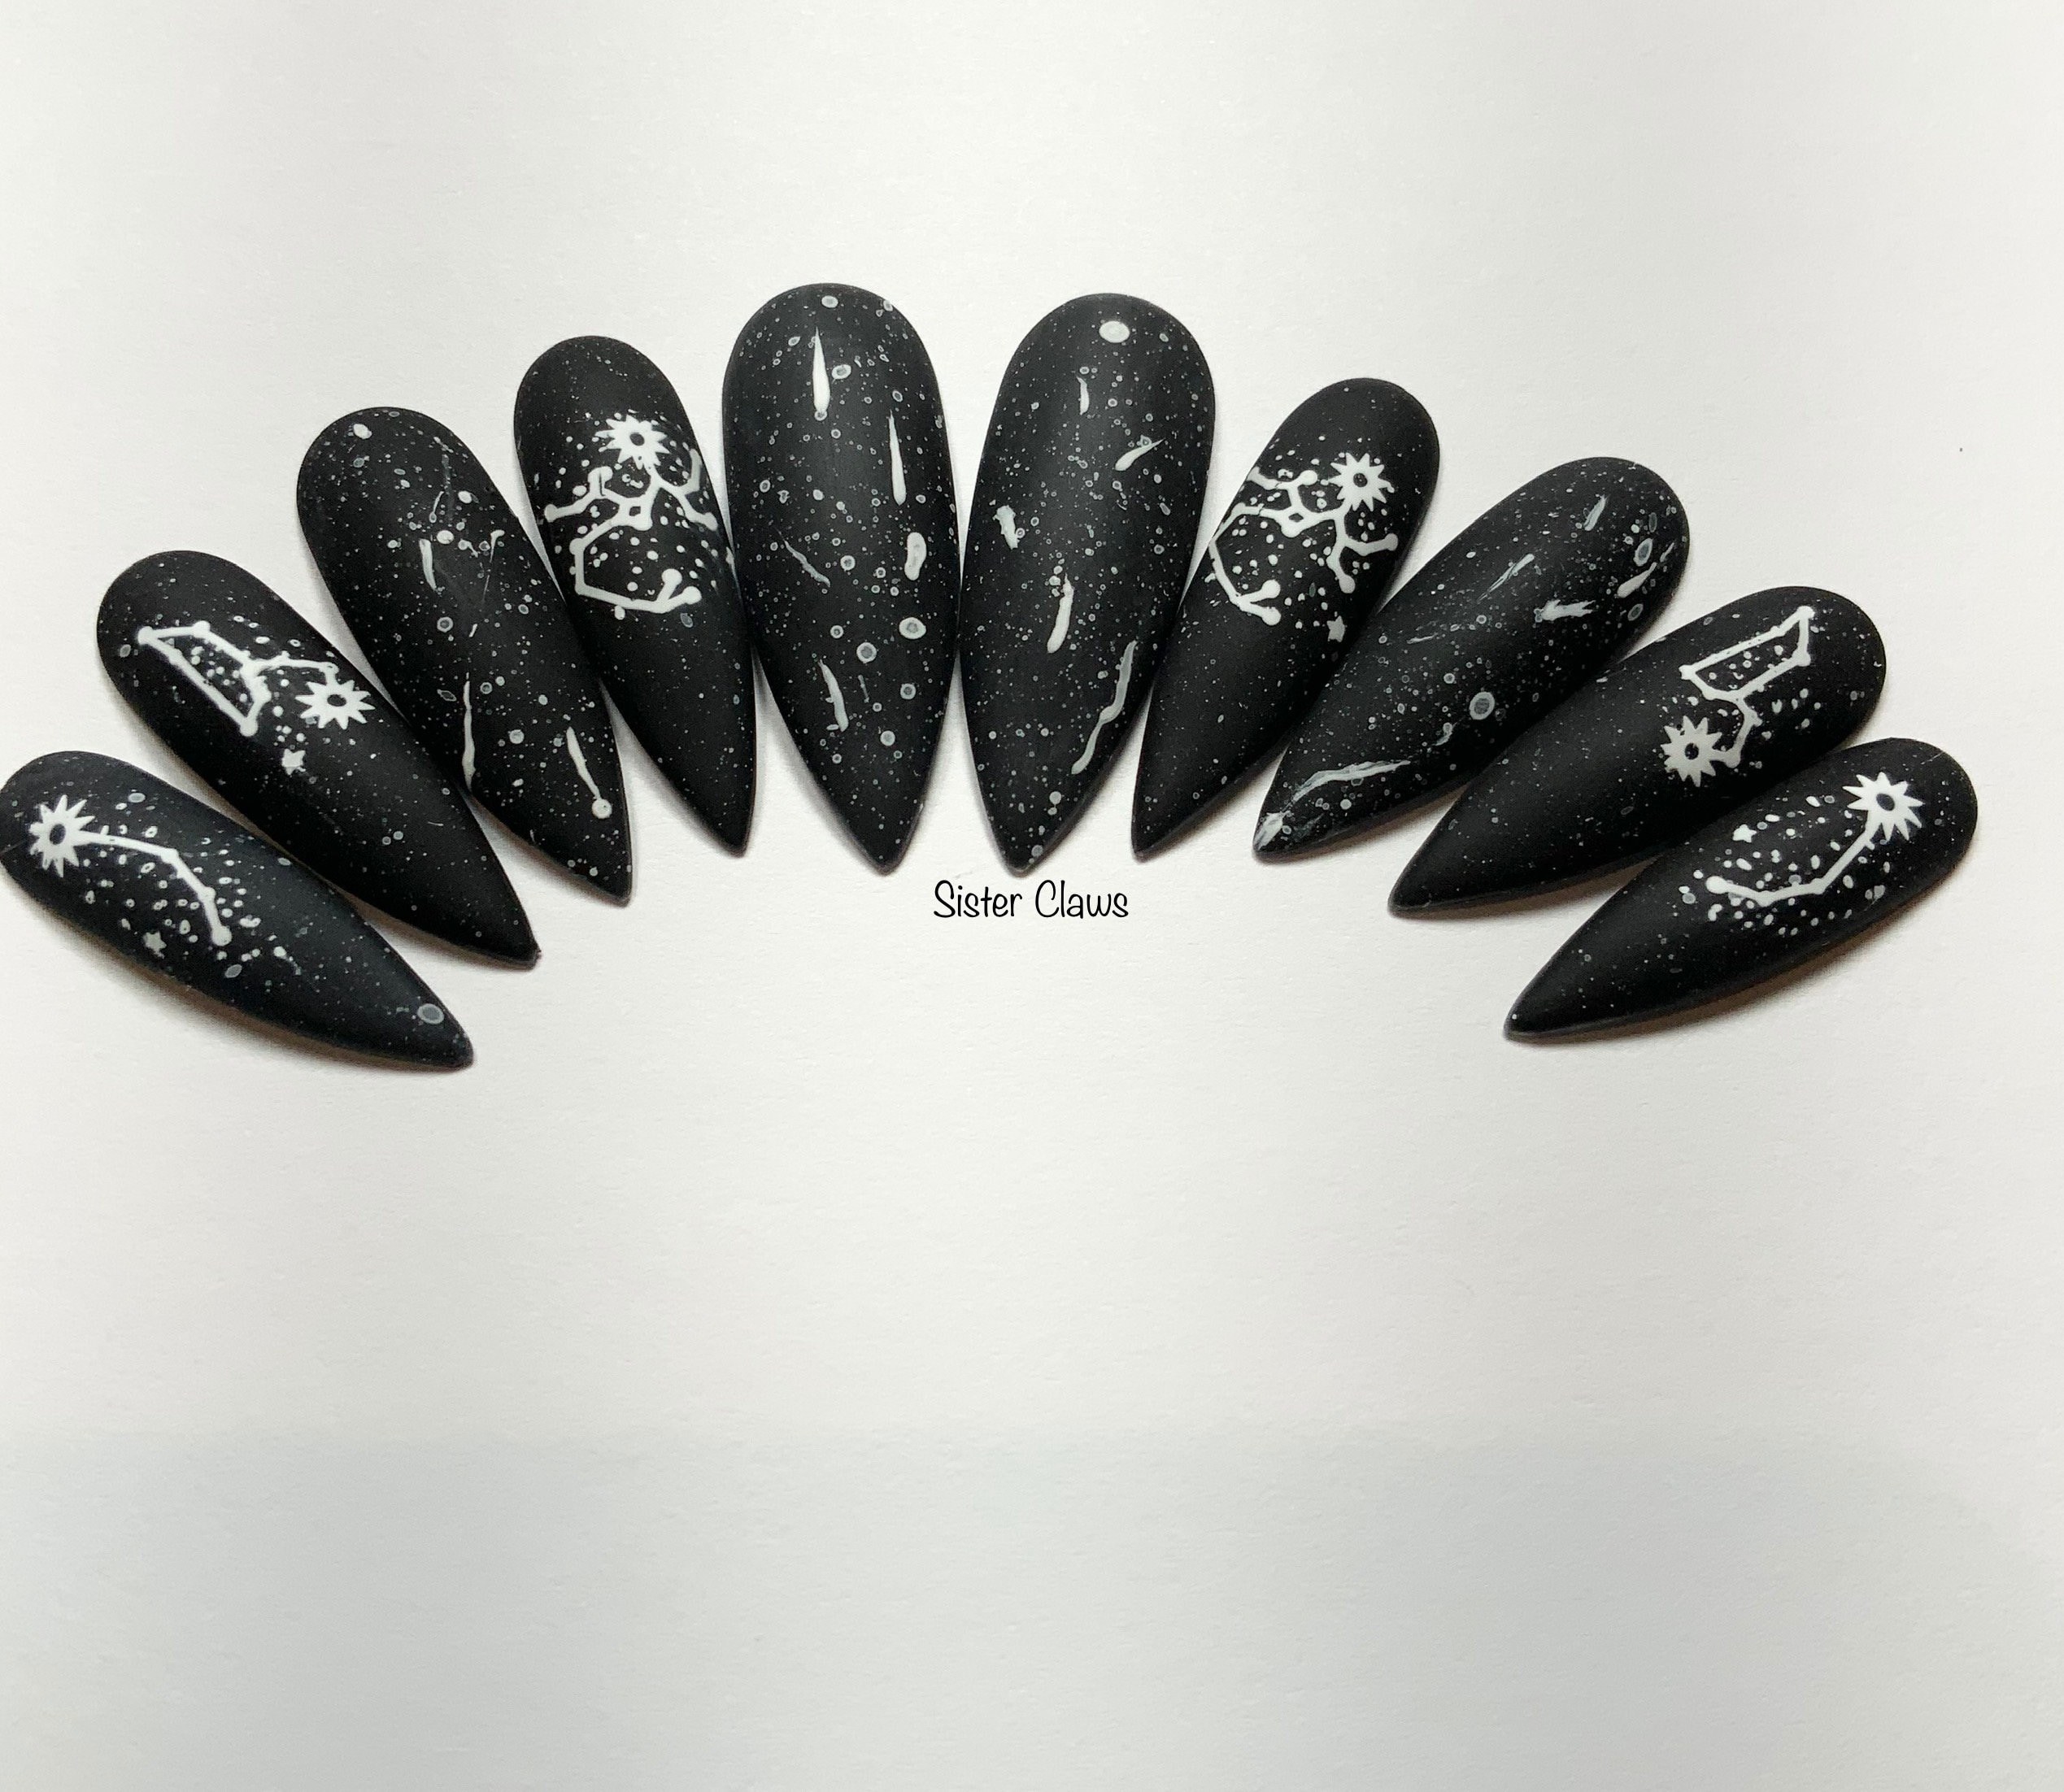 Nail Stamping Products for Stunning Star Nails